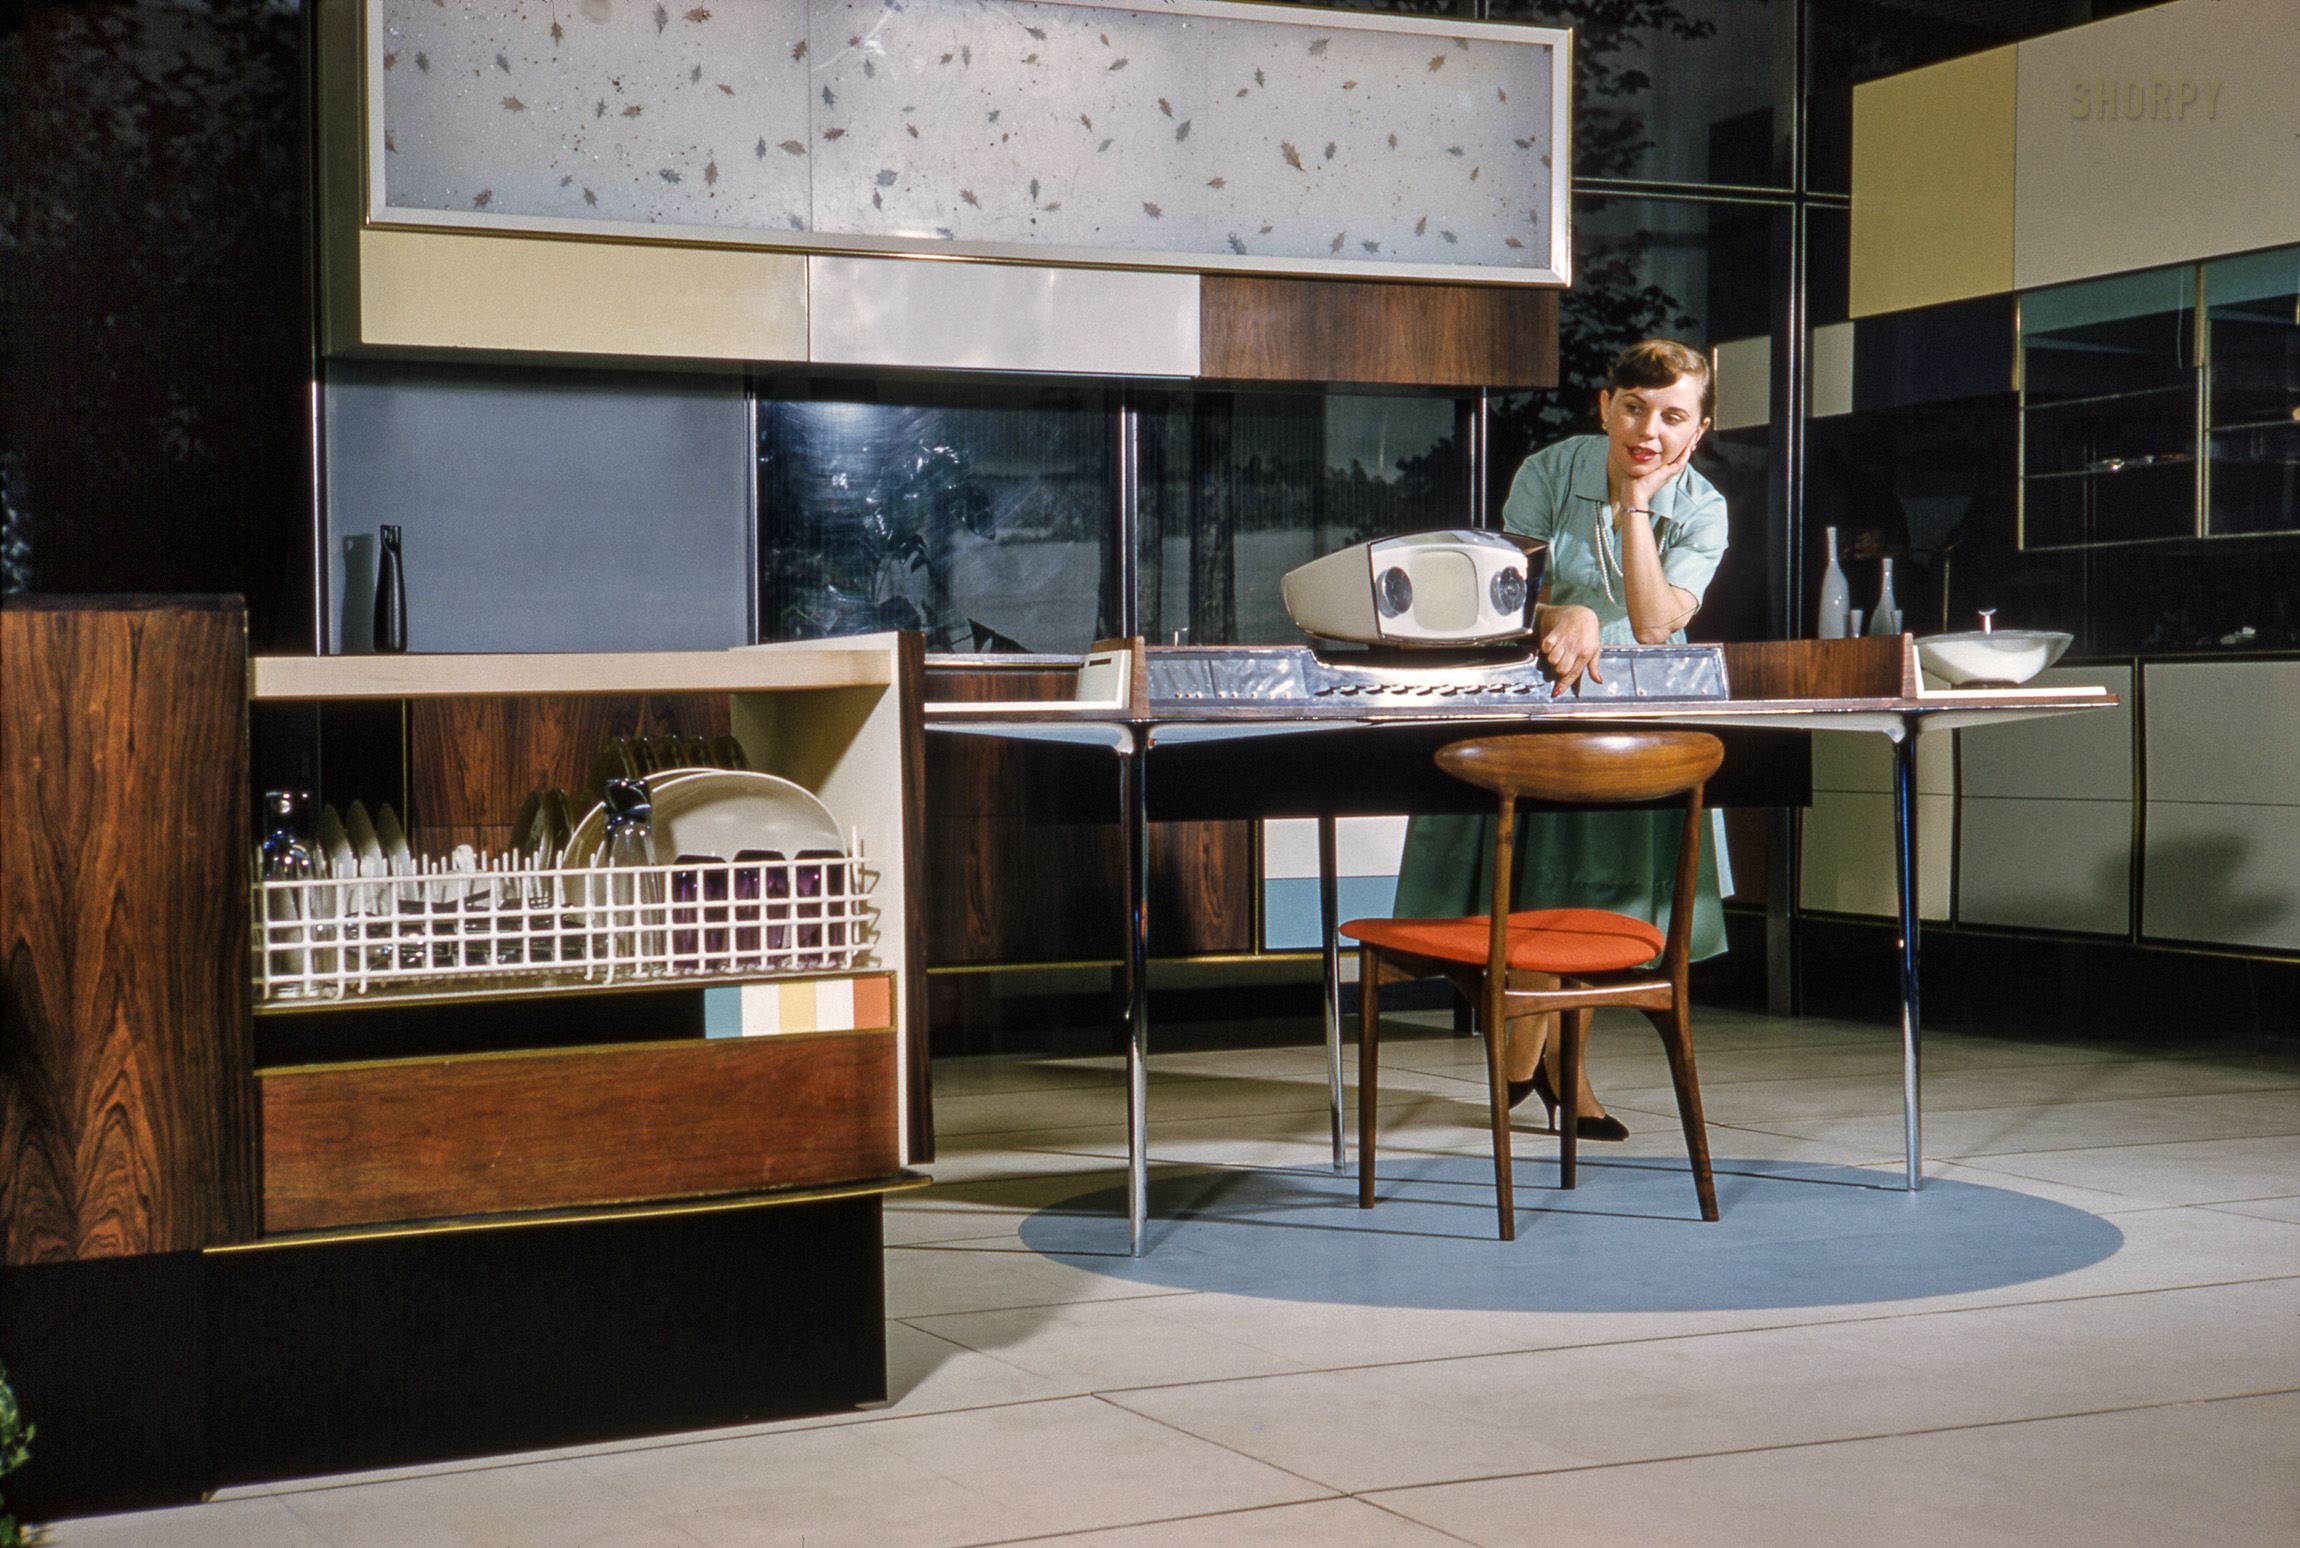 March 1959. "Home economist Anne Anderson demonstrating the RCA-Whirlpool 'Miracle Kitchen of the Future,' a display at the American National Exhibition in Moscow." Kodachrome by Bob Lerner for the Look magazine article "What the Russians Will See." View full size.